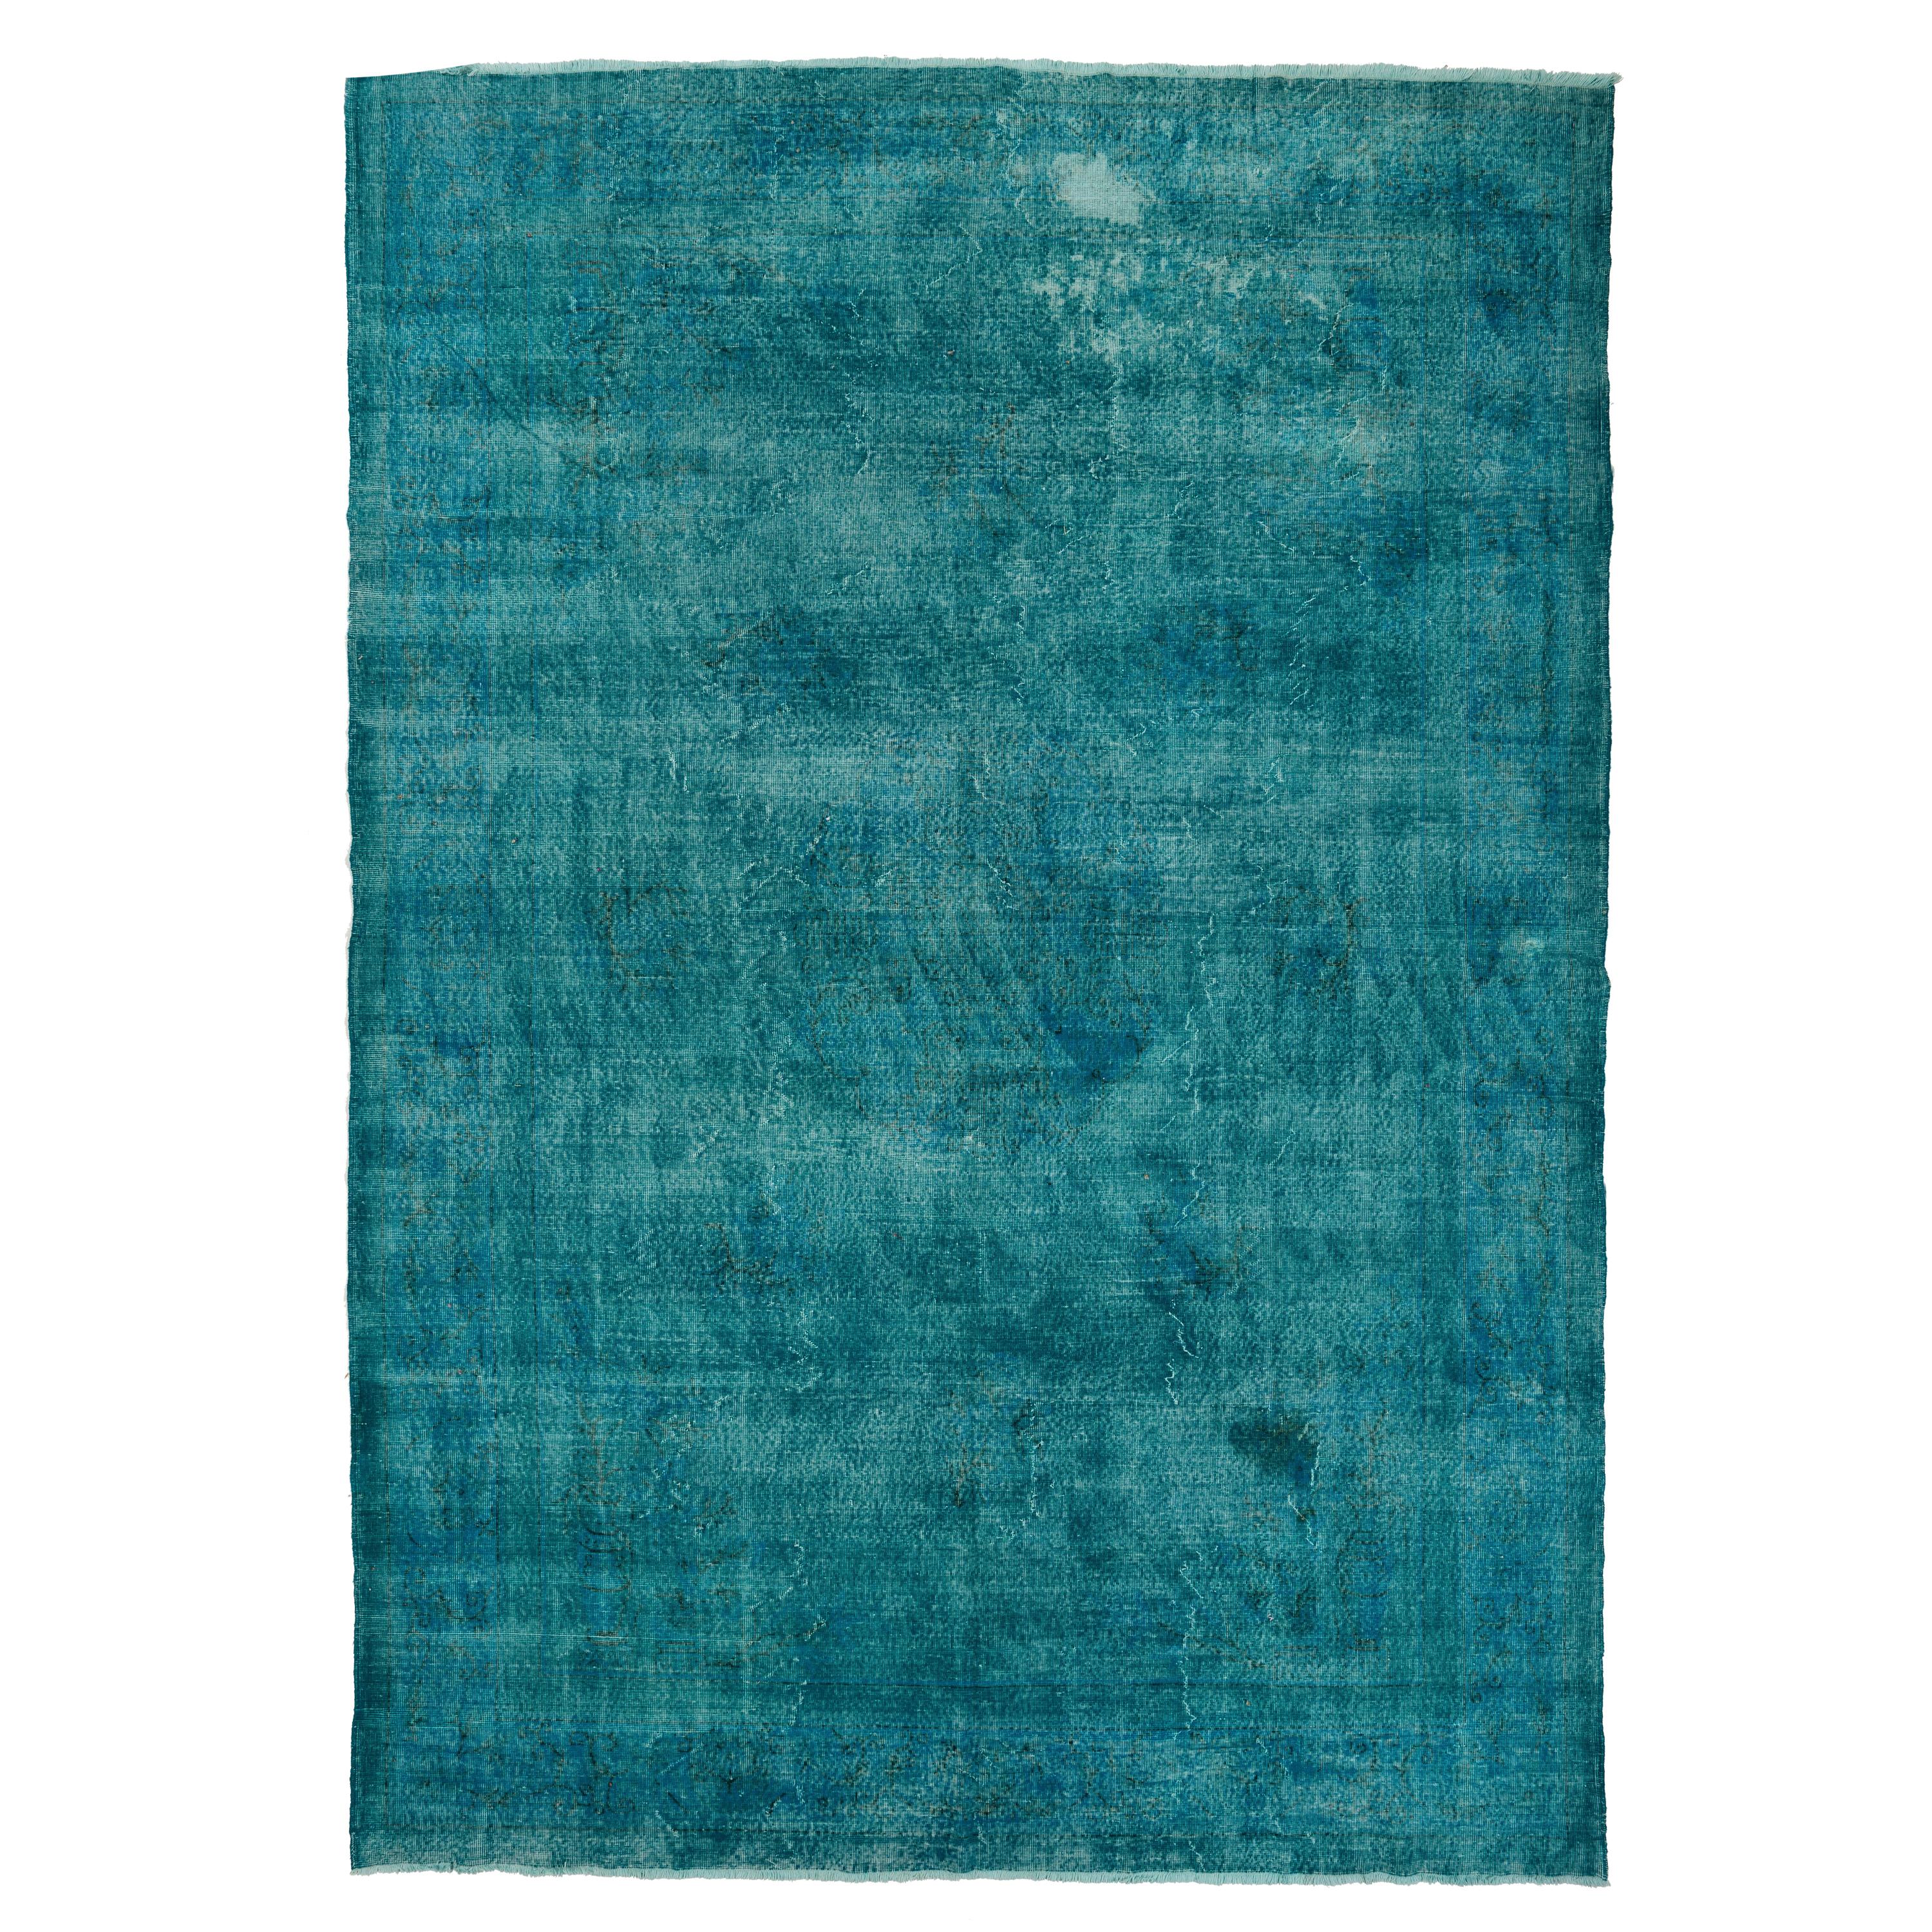 10x14 Ft Vintage Handmade Distressed Rug with Solid Design Over-dyed in Teal 